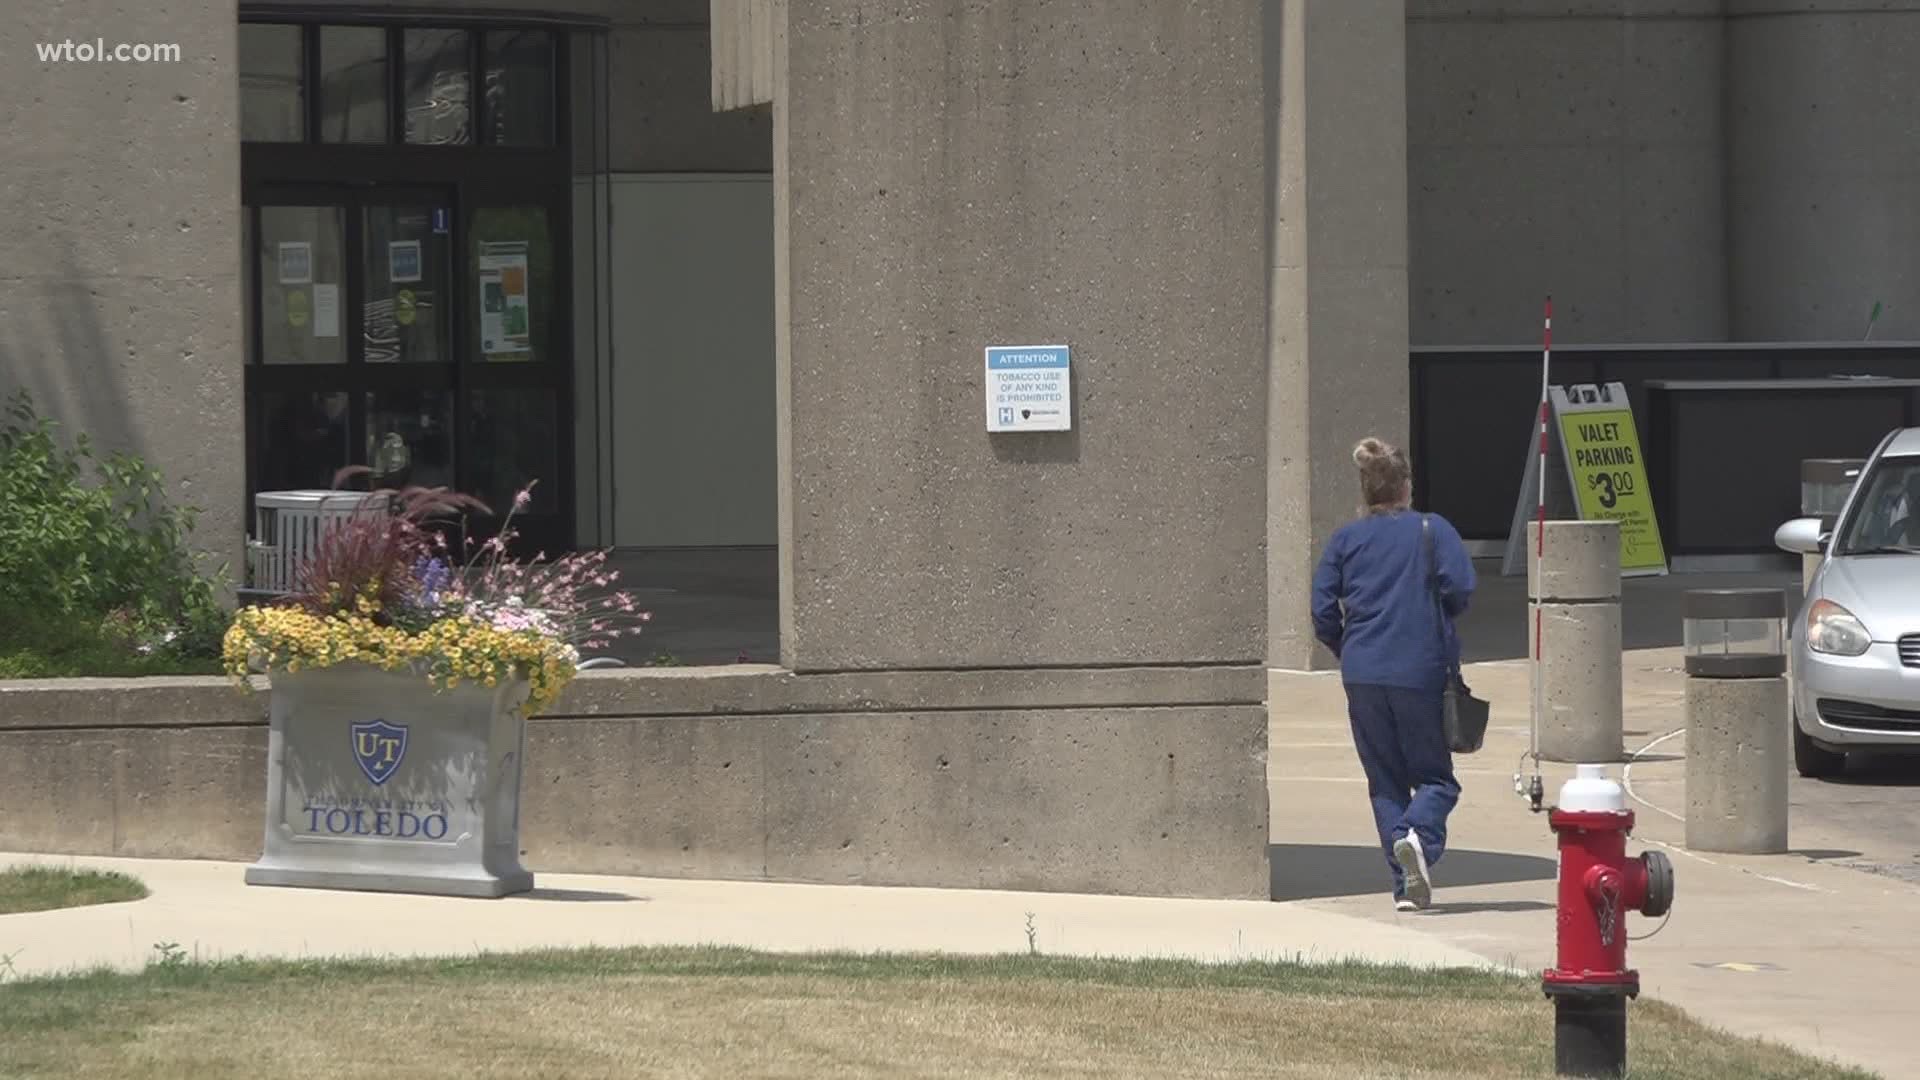 Lawmakers, including Ohio Sen.Theresa Fedor, are asking for a full audit to be conducted in order to evaluate UTMC's finances.